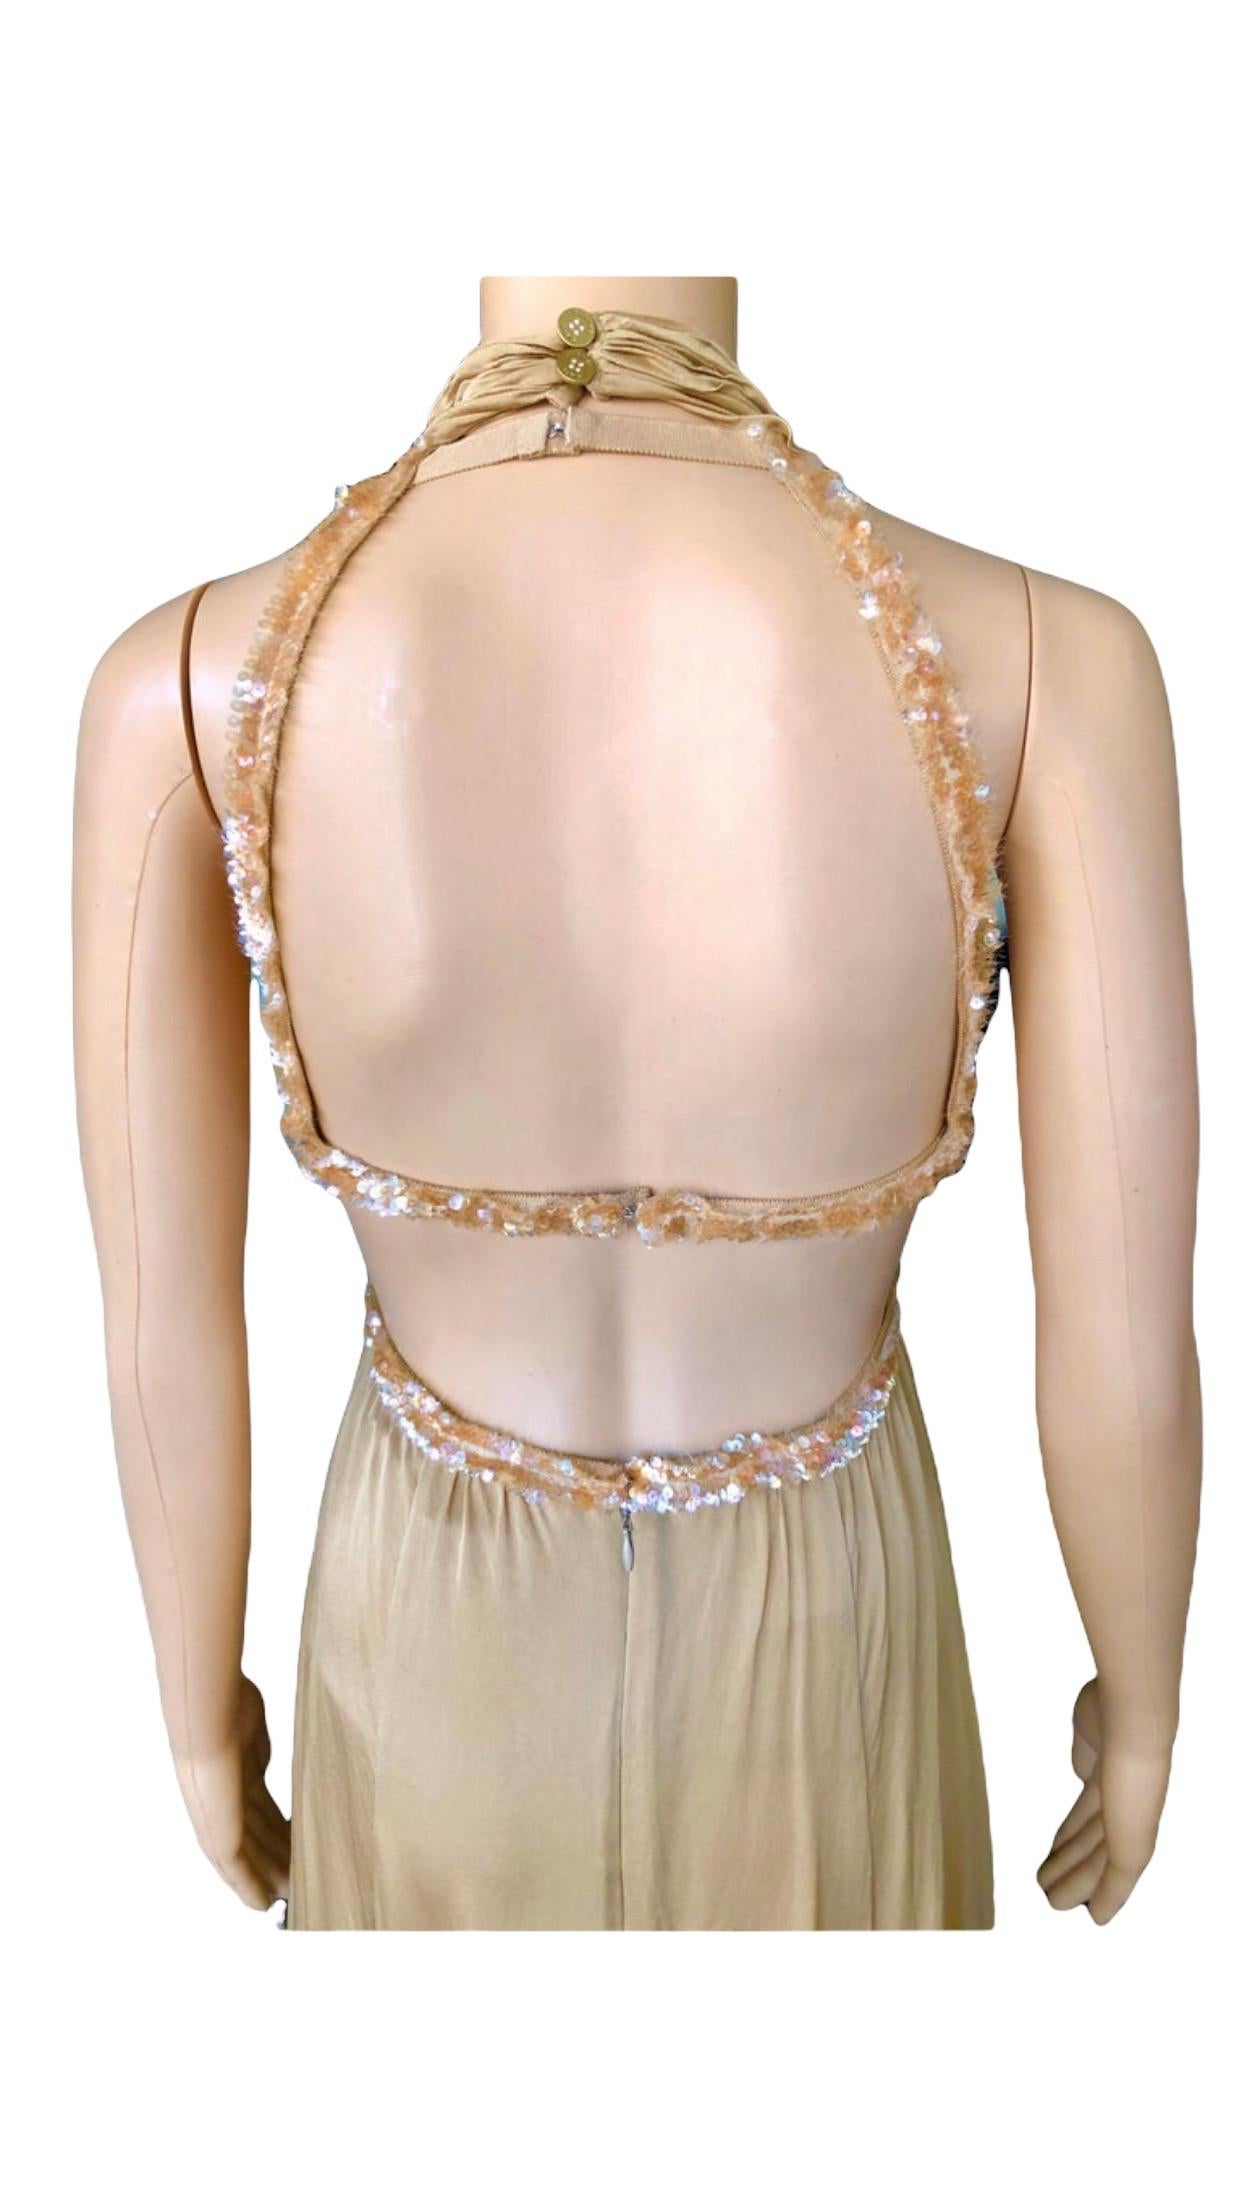 Chanel S/S 2003 Embellished Cut-Out Plunging Open Back Evening Dress Gown For Sale 10